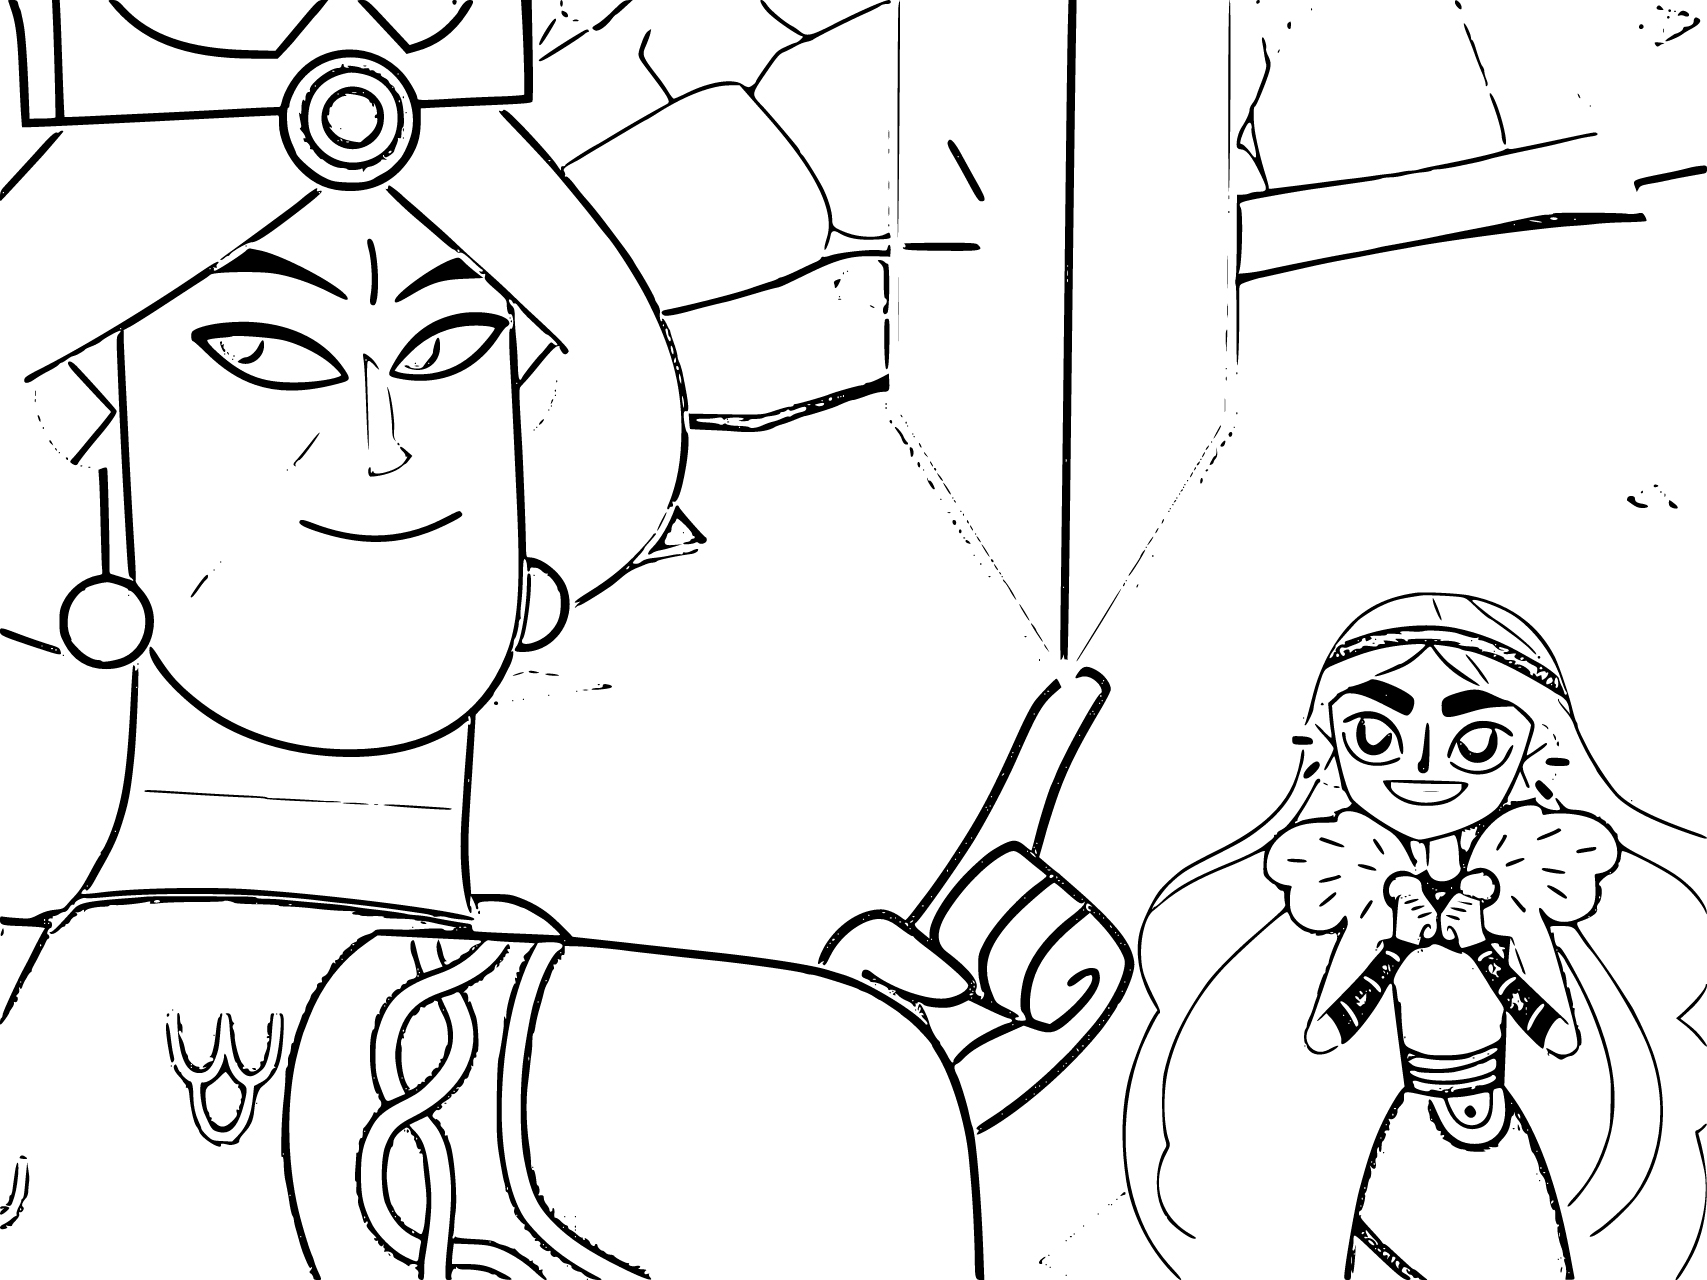 Printable Ylva and Teacher Coloring Page for kids.